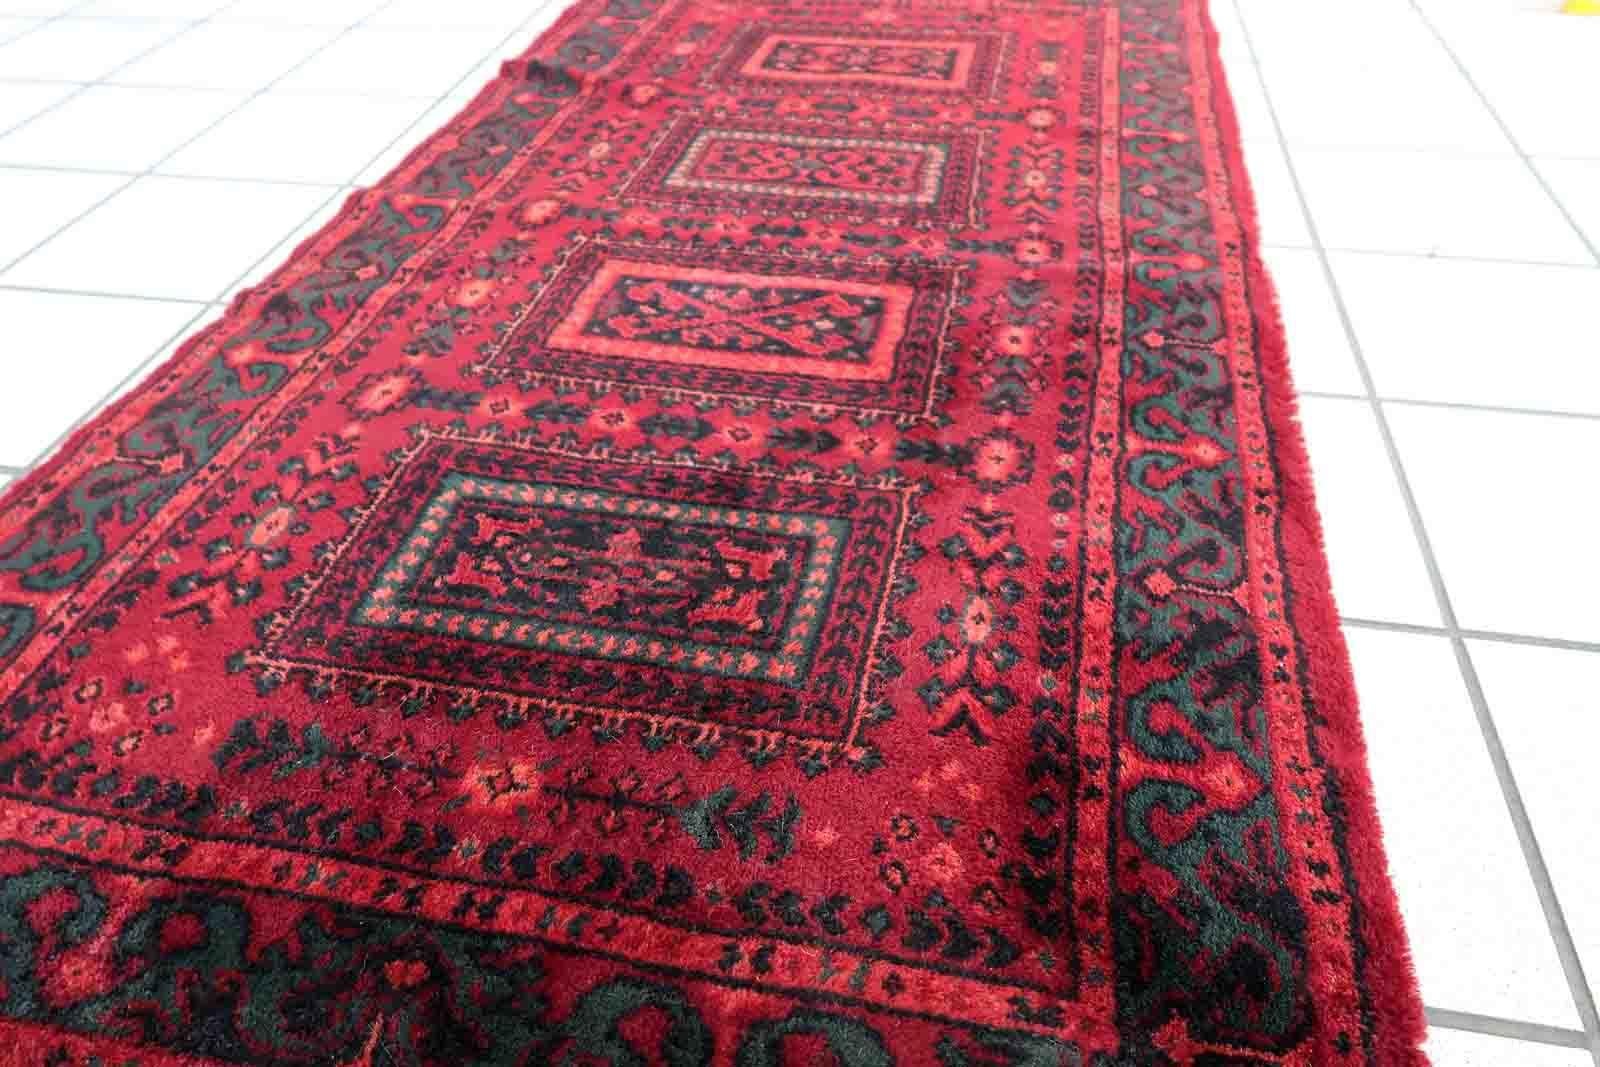 Vintage red woolen rug from Germany made in Baluch style. The rug is in deep red and emerald shades. It is from the middle of 20th century in original good condition.

-condition: original good,

-circa: 1960s,

-size: 2.3' x 4.4' (71cm x